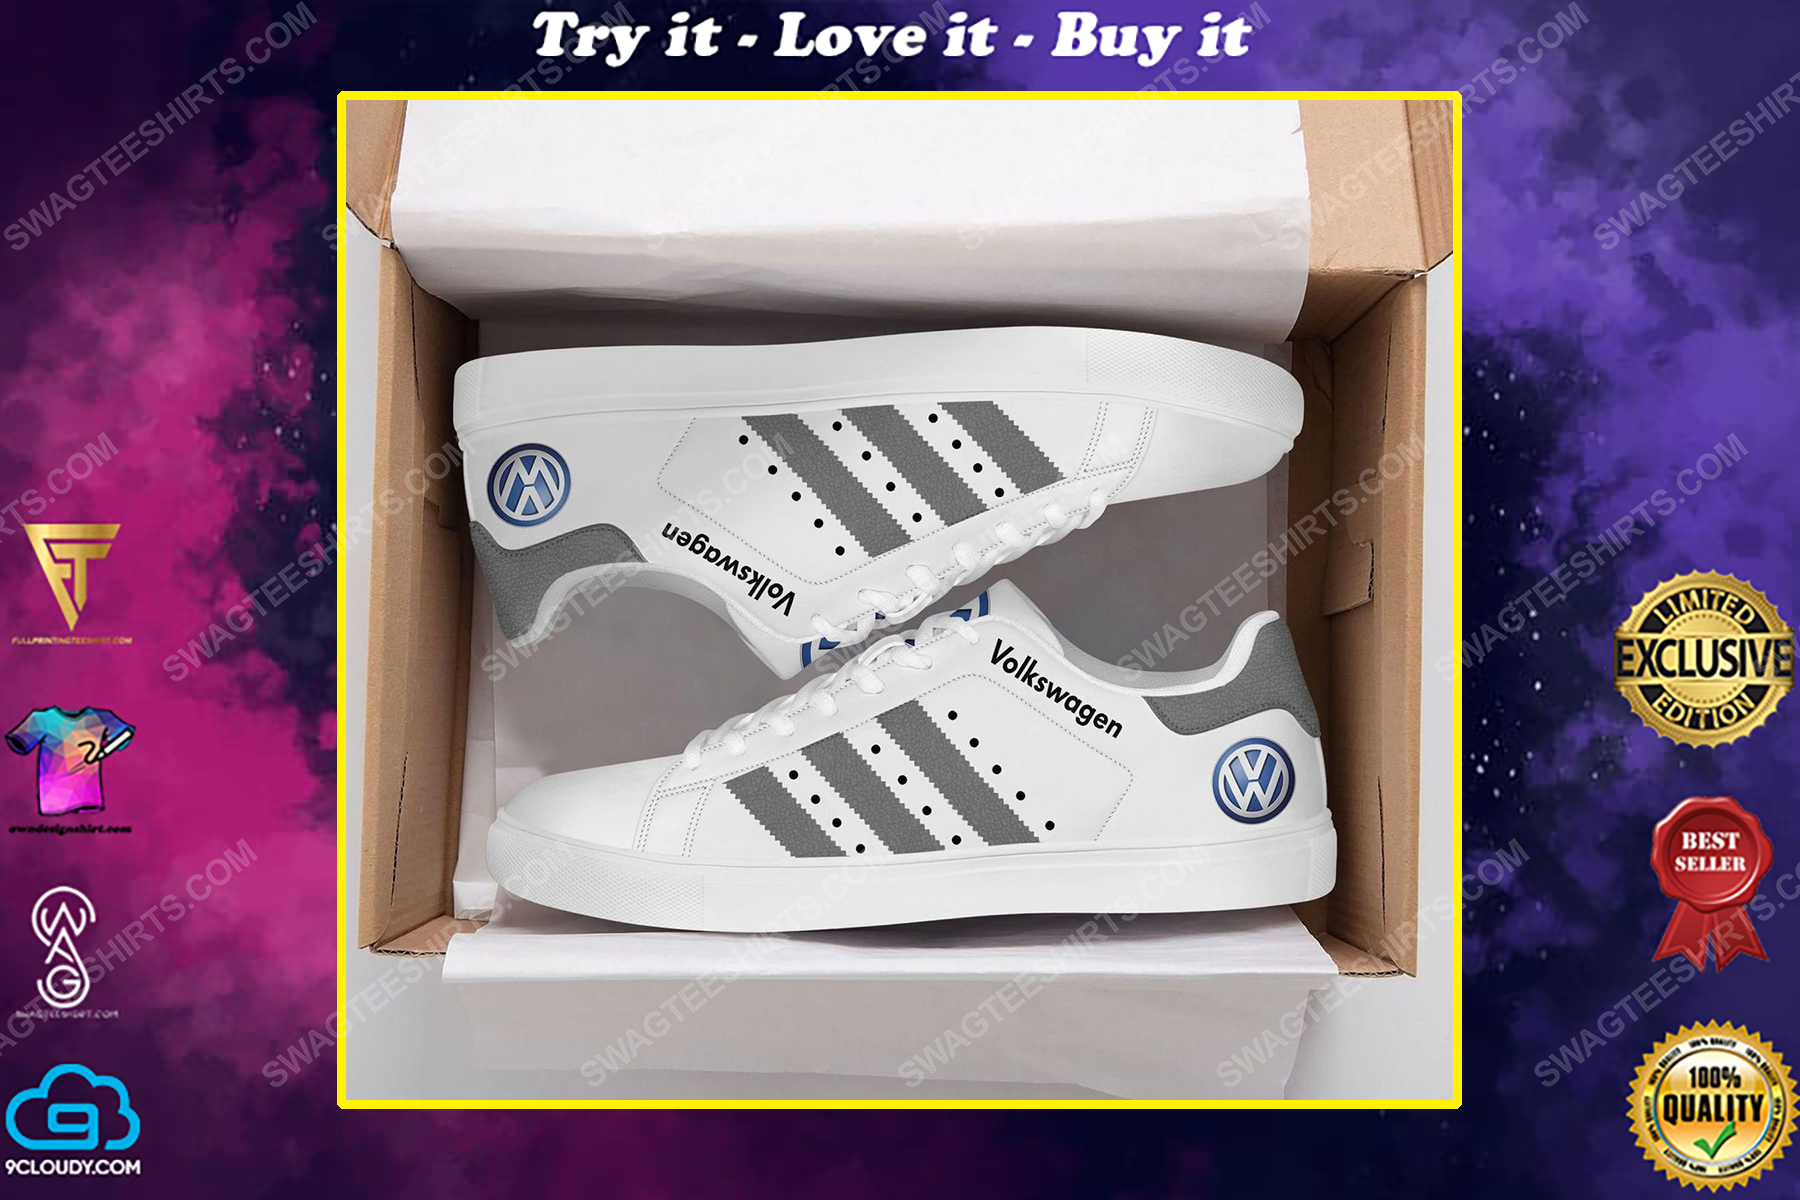 The volkswagen version grey stan smith shoes